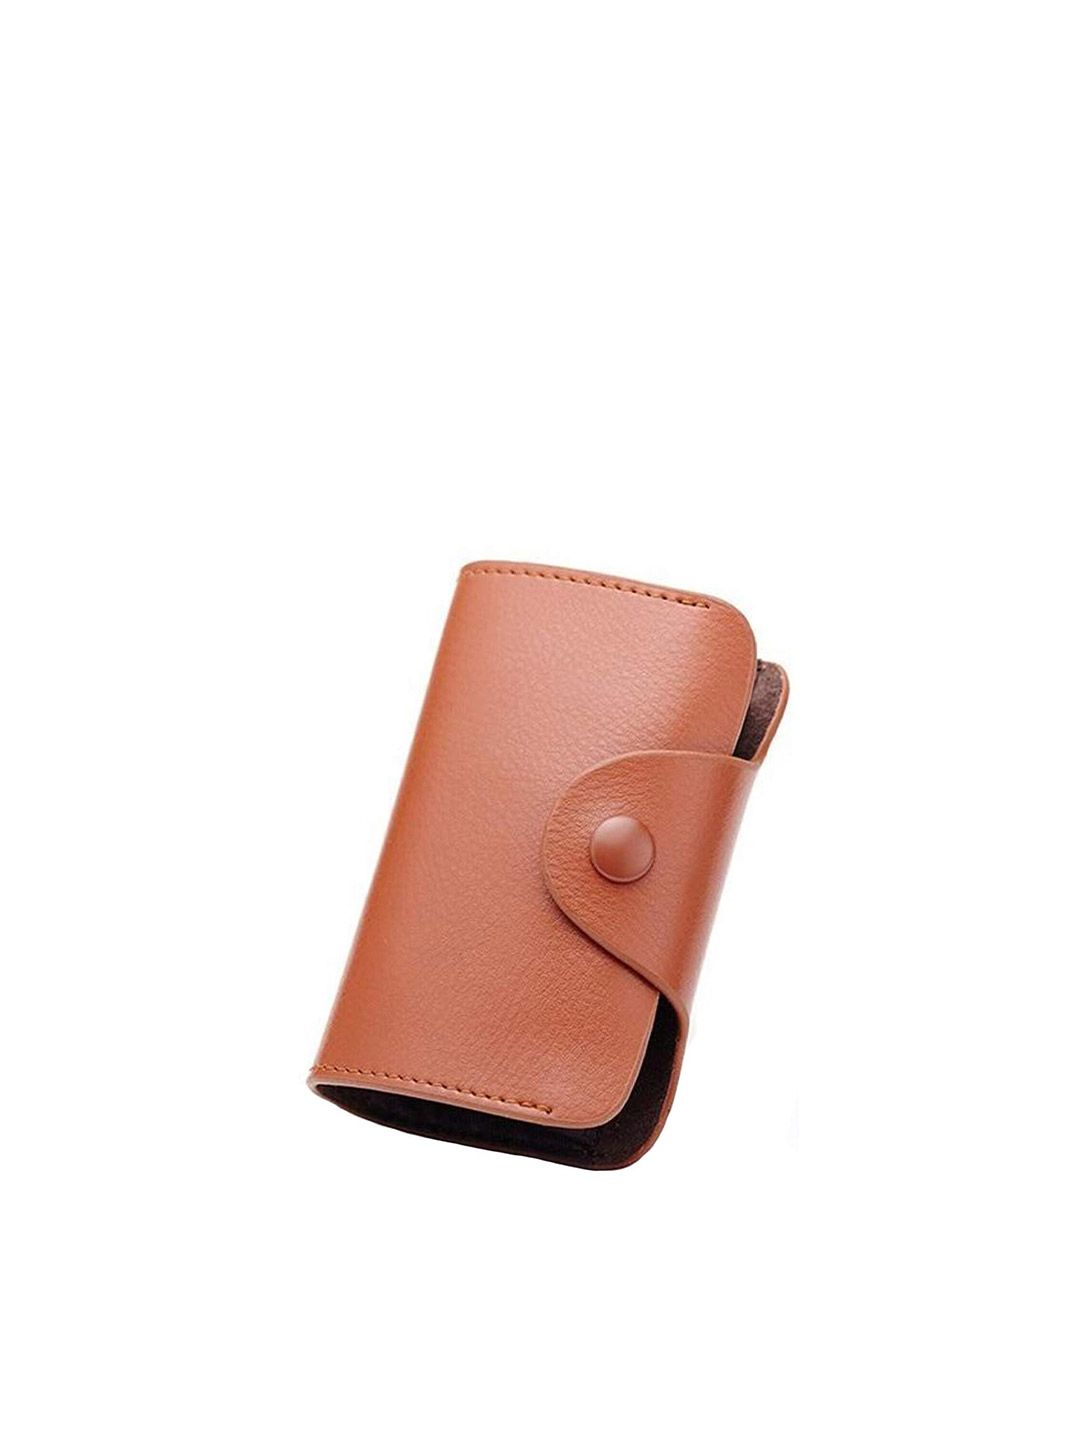 StealODeal Unisex Brown Leather Card Holder Price in India